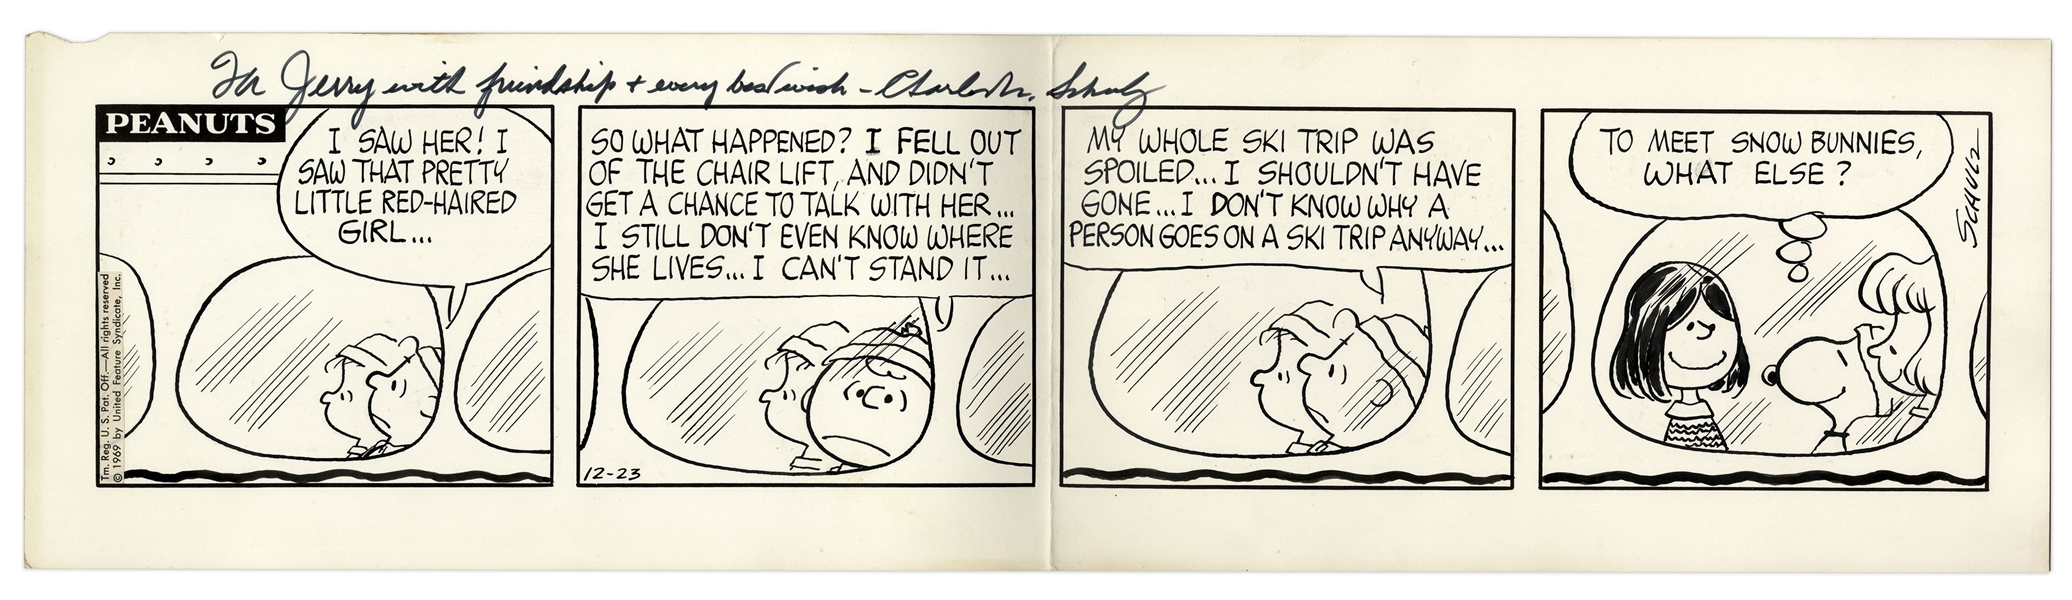 Charles Schulz Hand-Drawn & Inscribed ''Peanuts'' Comic Strip From 1969 -- Featuring Charlie Brown, Snoopy & the ''Pretty Little Red-Haired Girl''